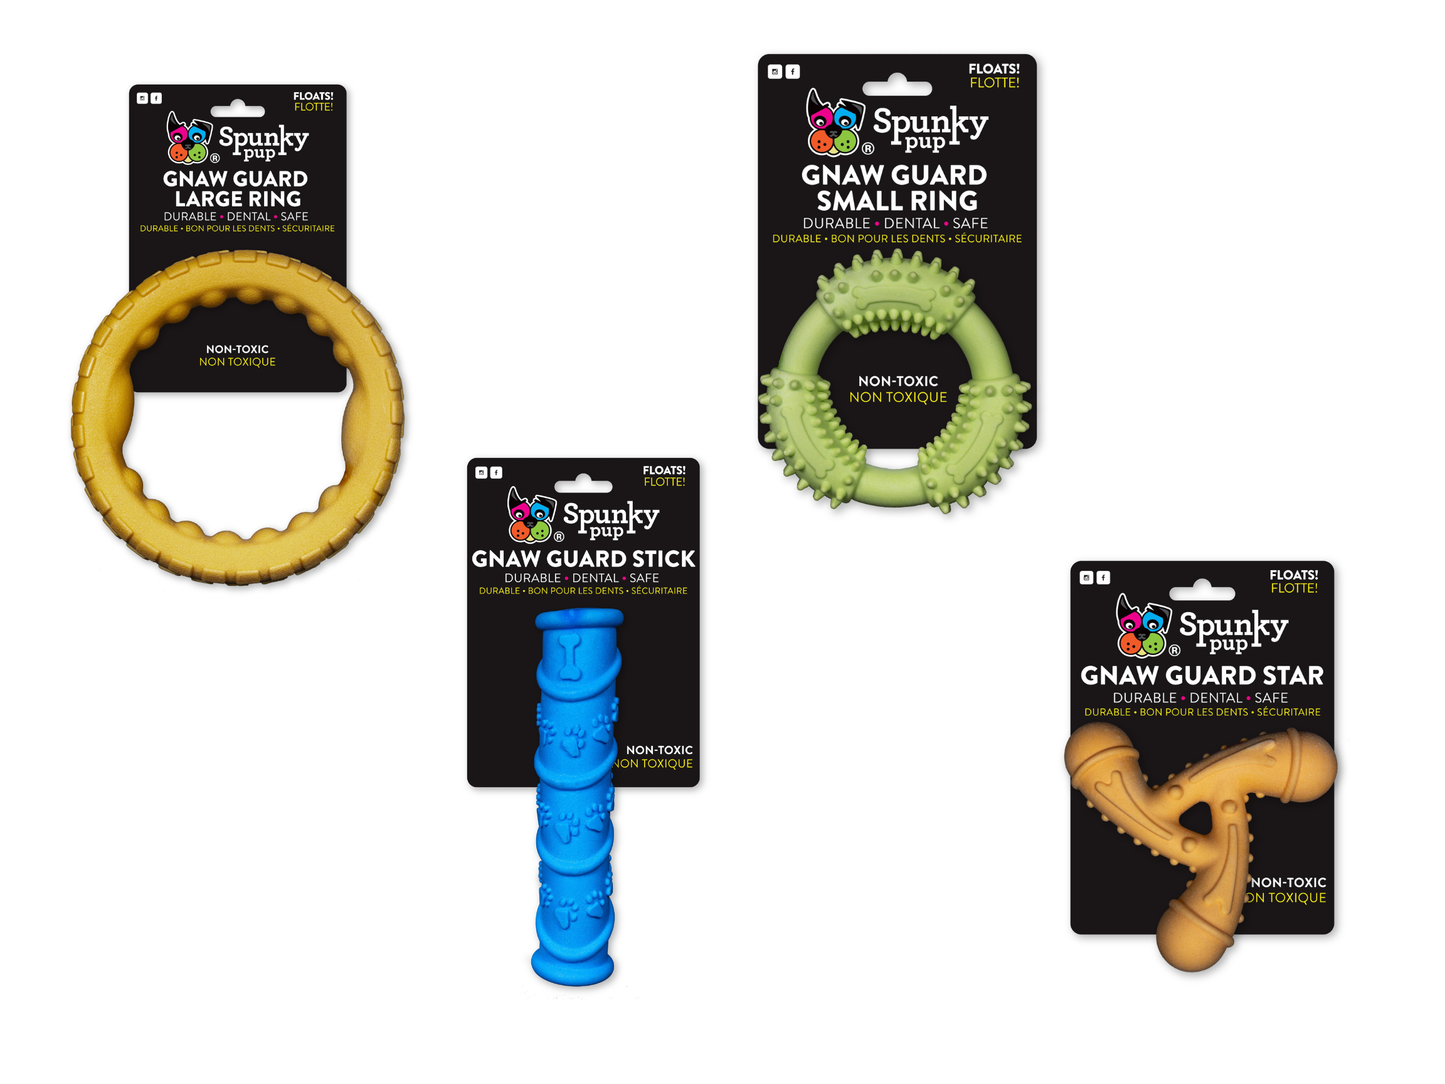 Gnaw Guard Foam Toys -  Large Ring, Small Ring, Star, Stick: Star